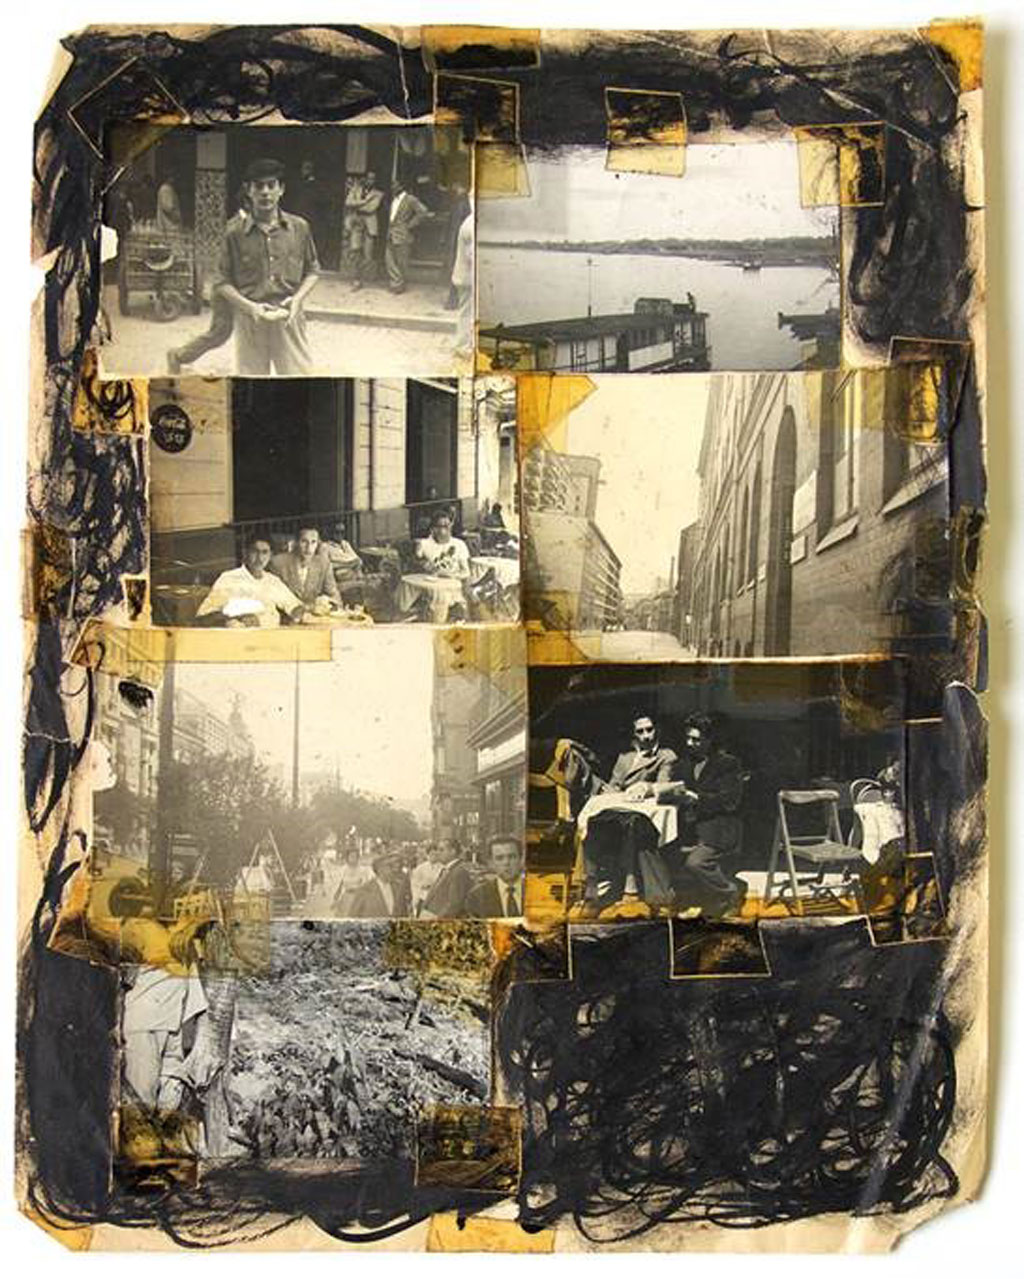 Image (right) by William Burroughs: Untitled, 1972 - 73 (Courtesy of the Barry Miles Archive)